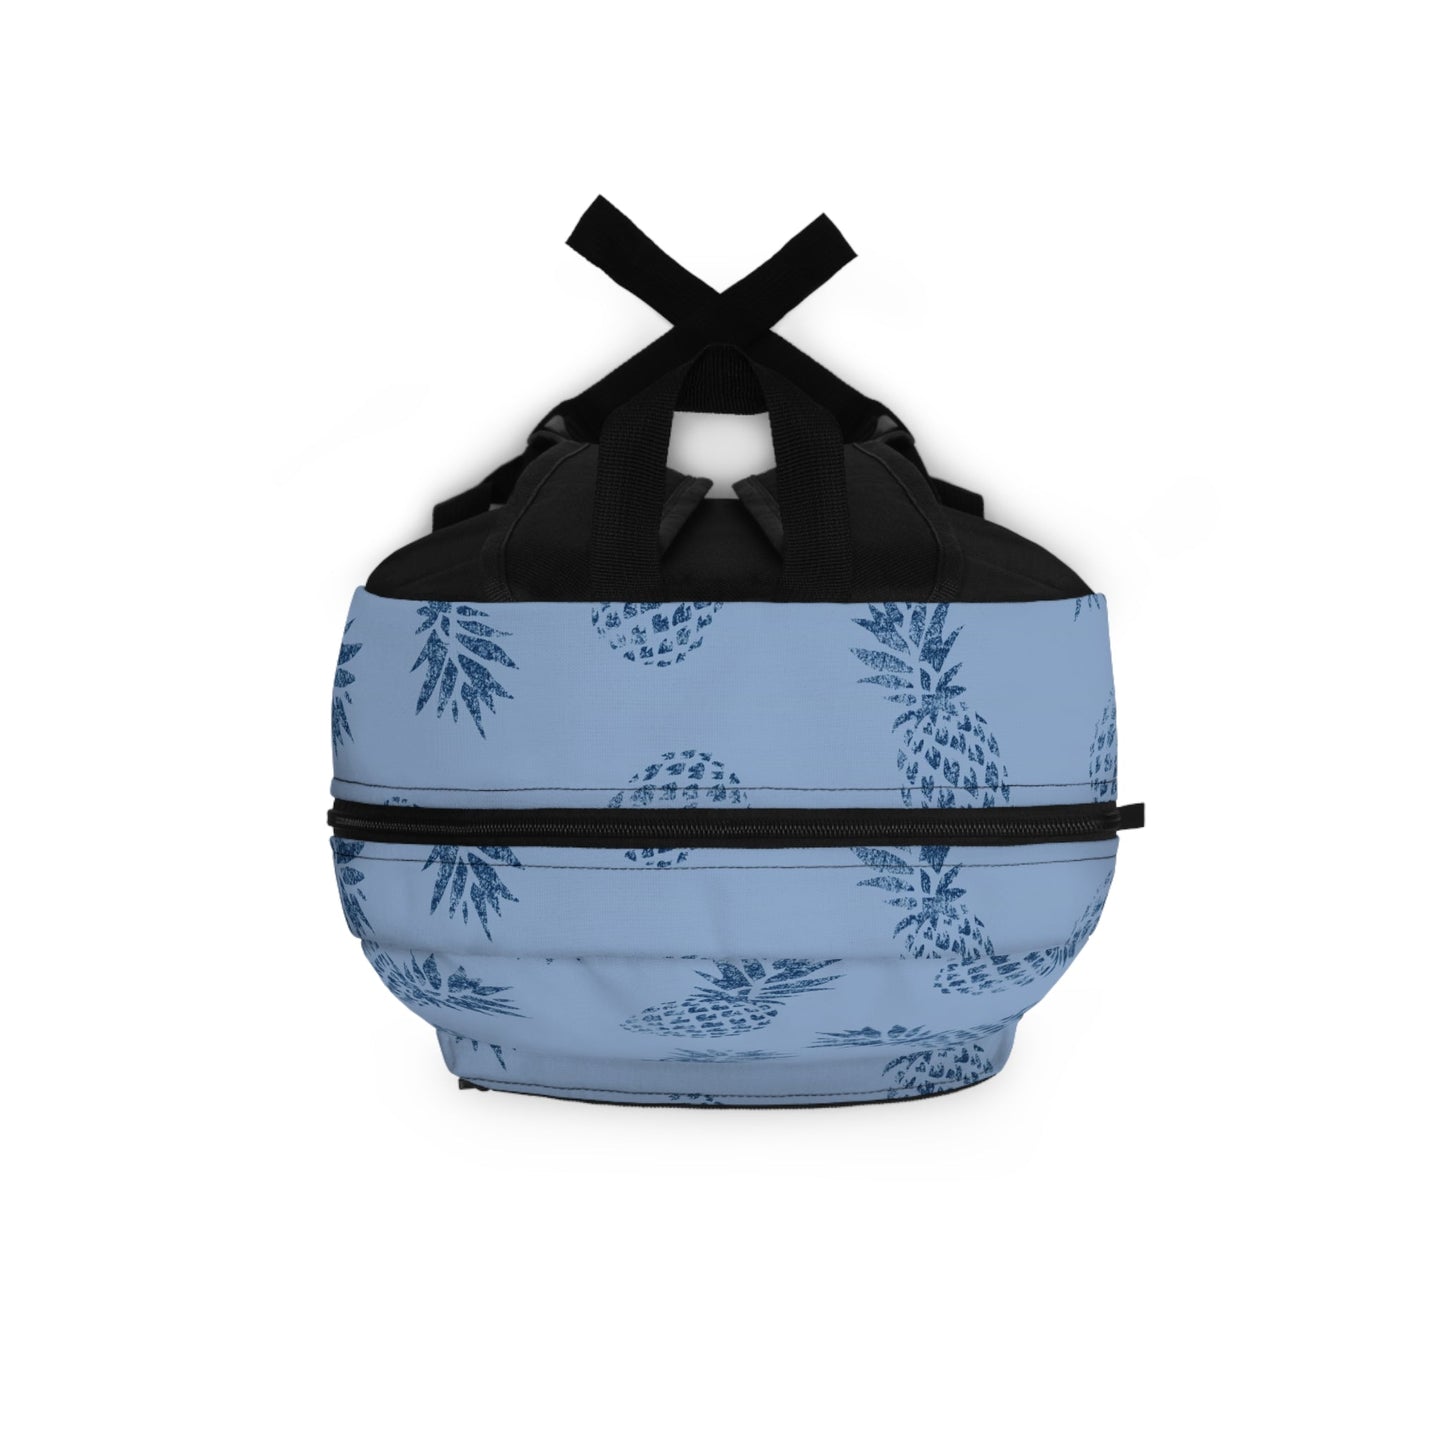 Backpack PIneapple in Blueberry Milk - Global Village Kailua Boutique